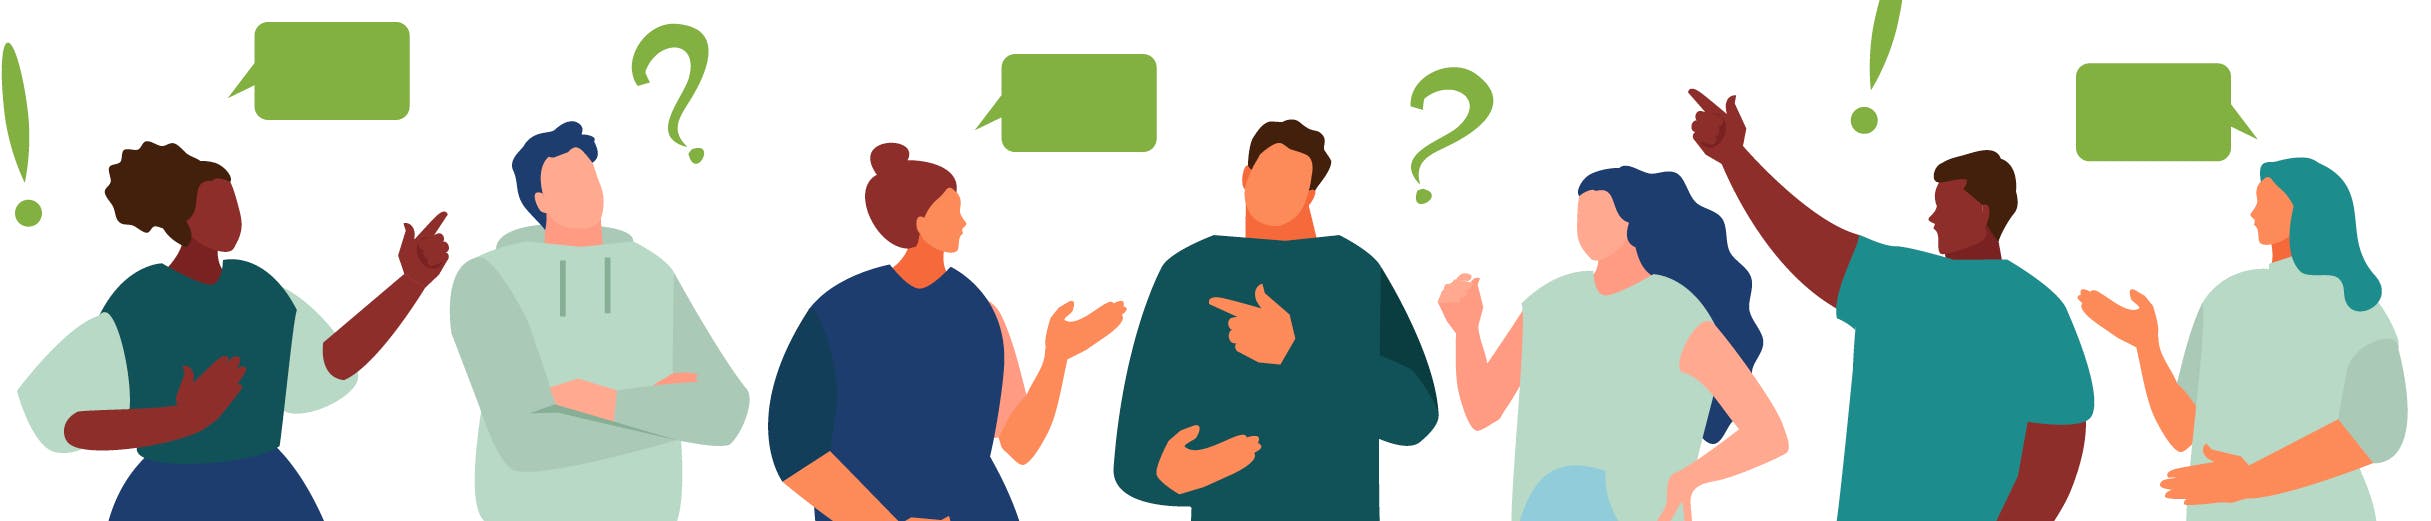 Illustration of people talking and communicating